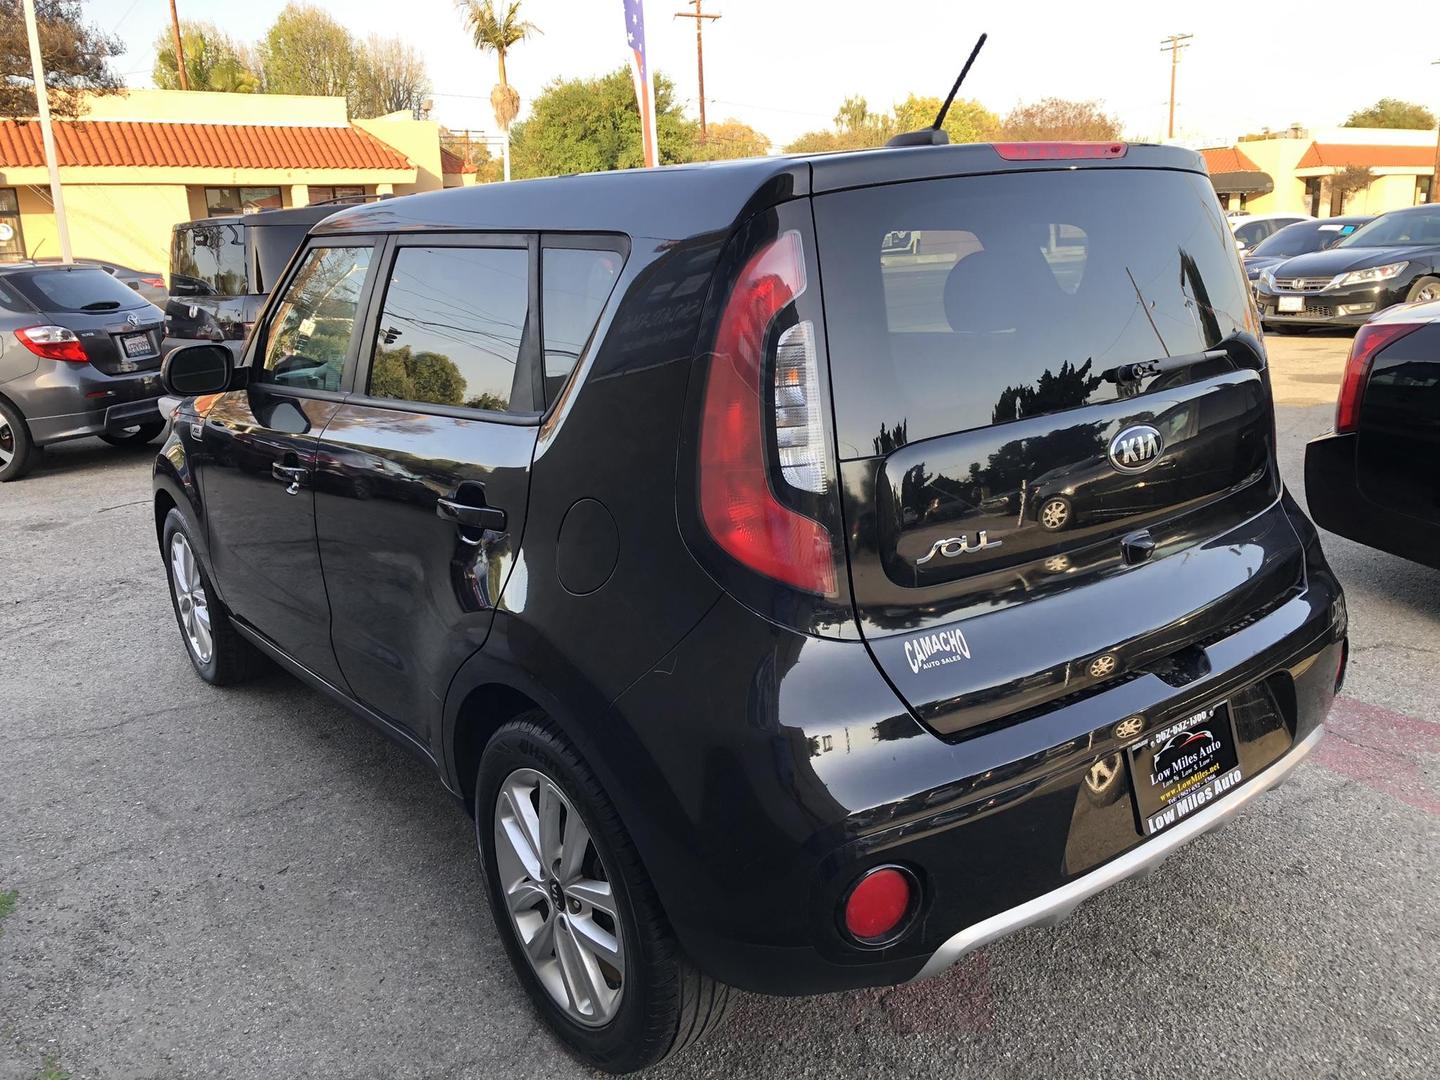 USED KIA SOUL 2017 for sale in Whittier CA Low Miles Auto